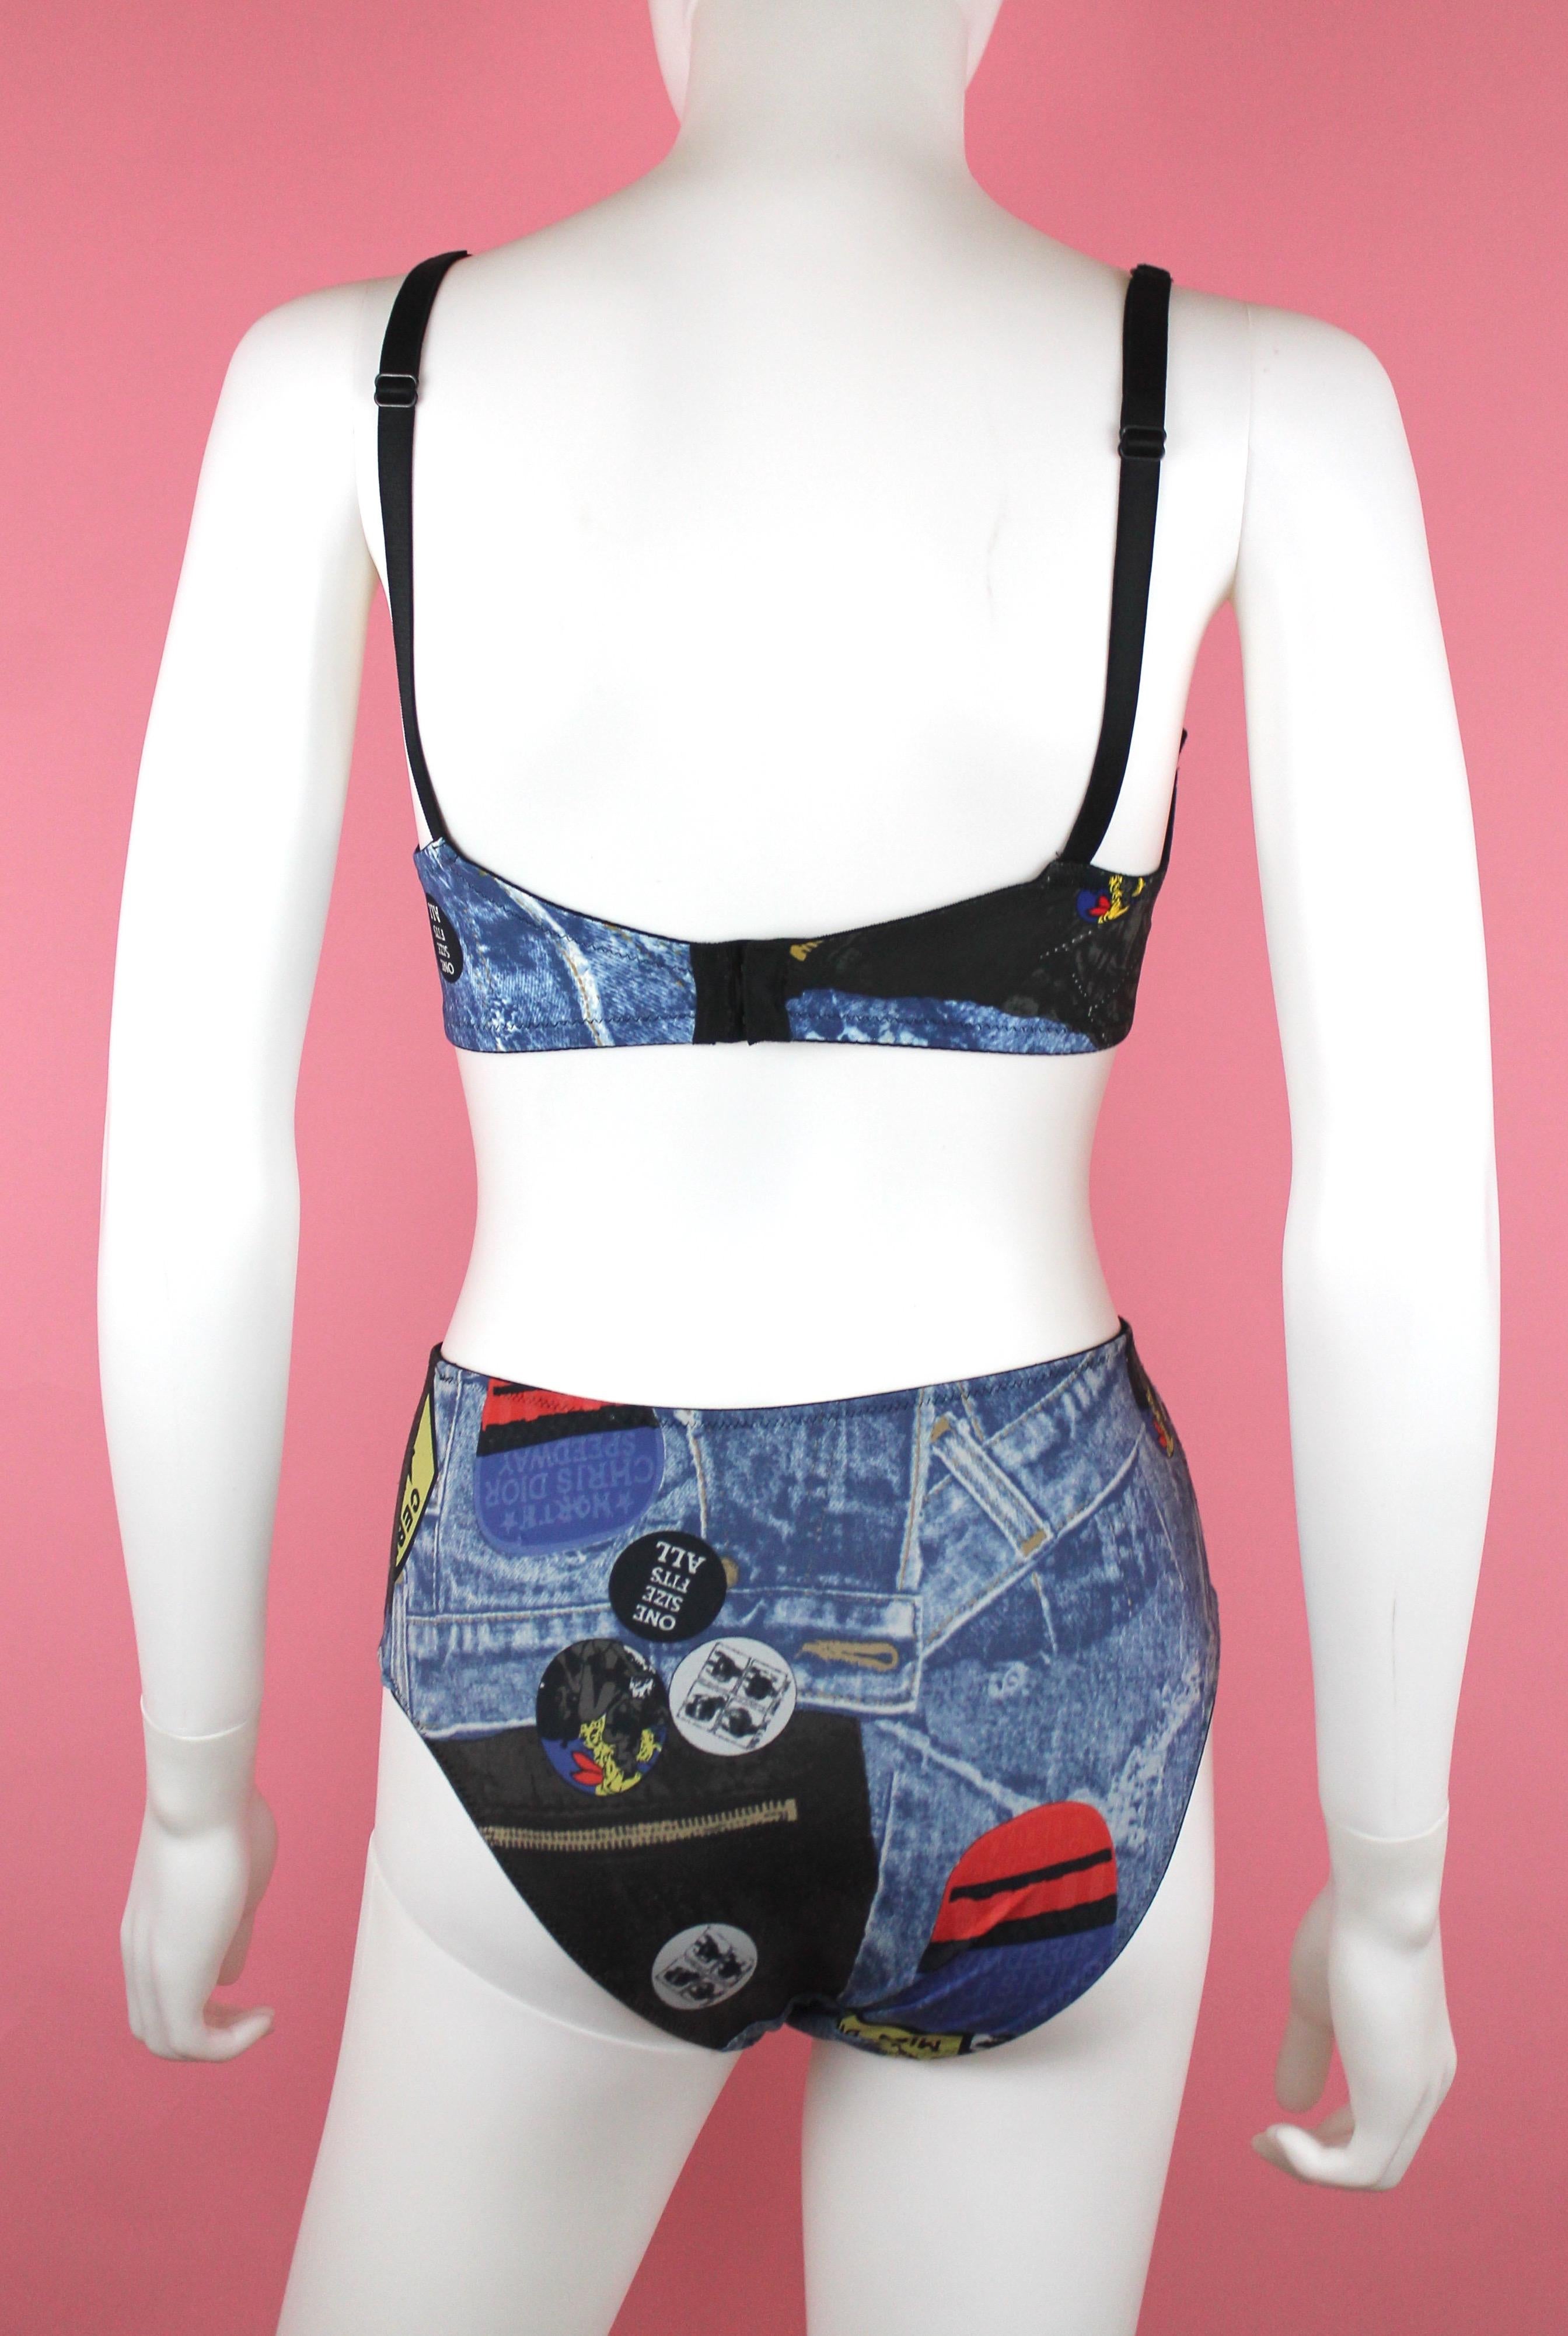 -Rare set from Dior Miss Diorella collection, from Galliano era 
-Features denim trompe l'oeil print and slogans 
-Bottoms are high waisted 
-Could be worn as a lingerie set or bikini, material is swimsuit like. 
-Made in France
-100%